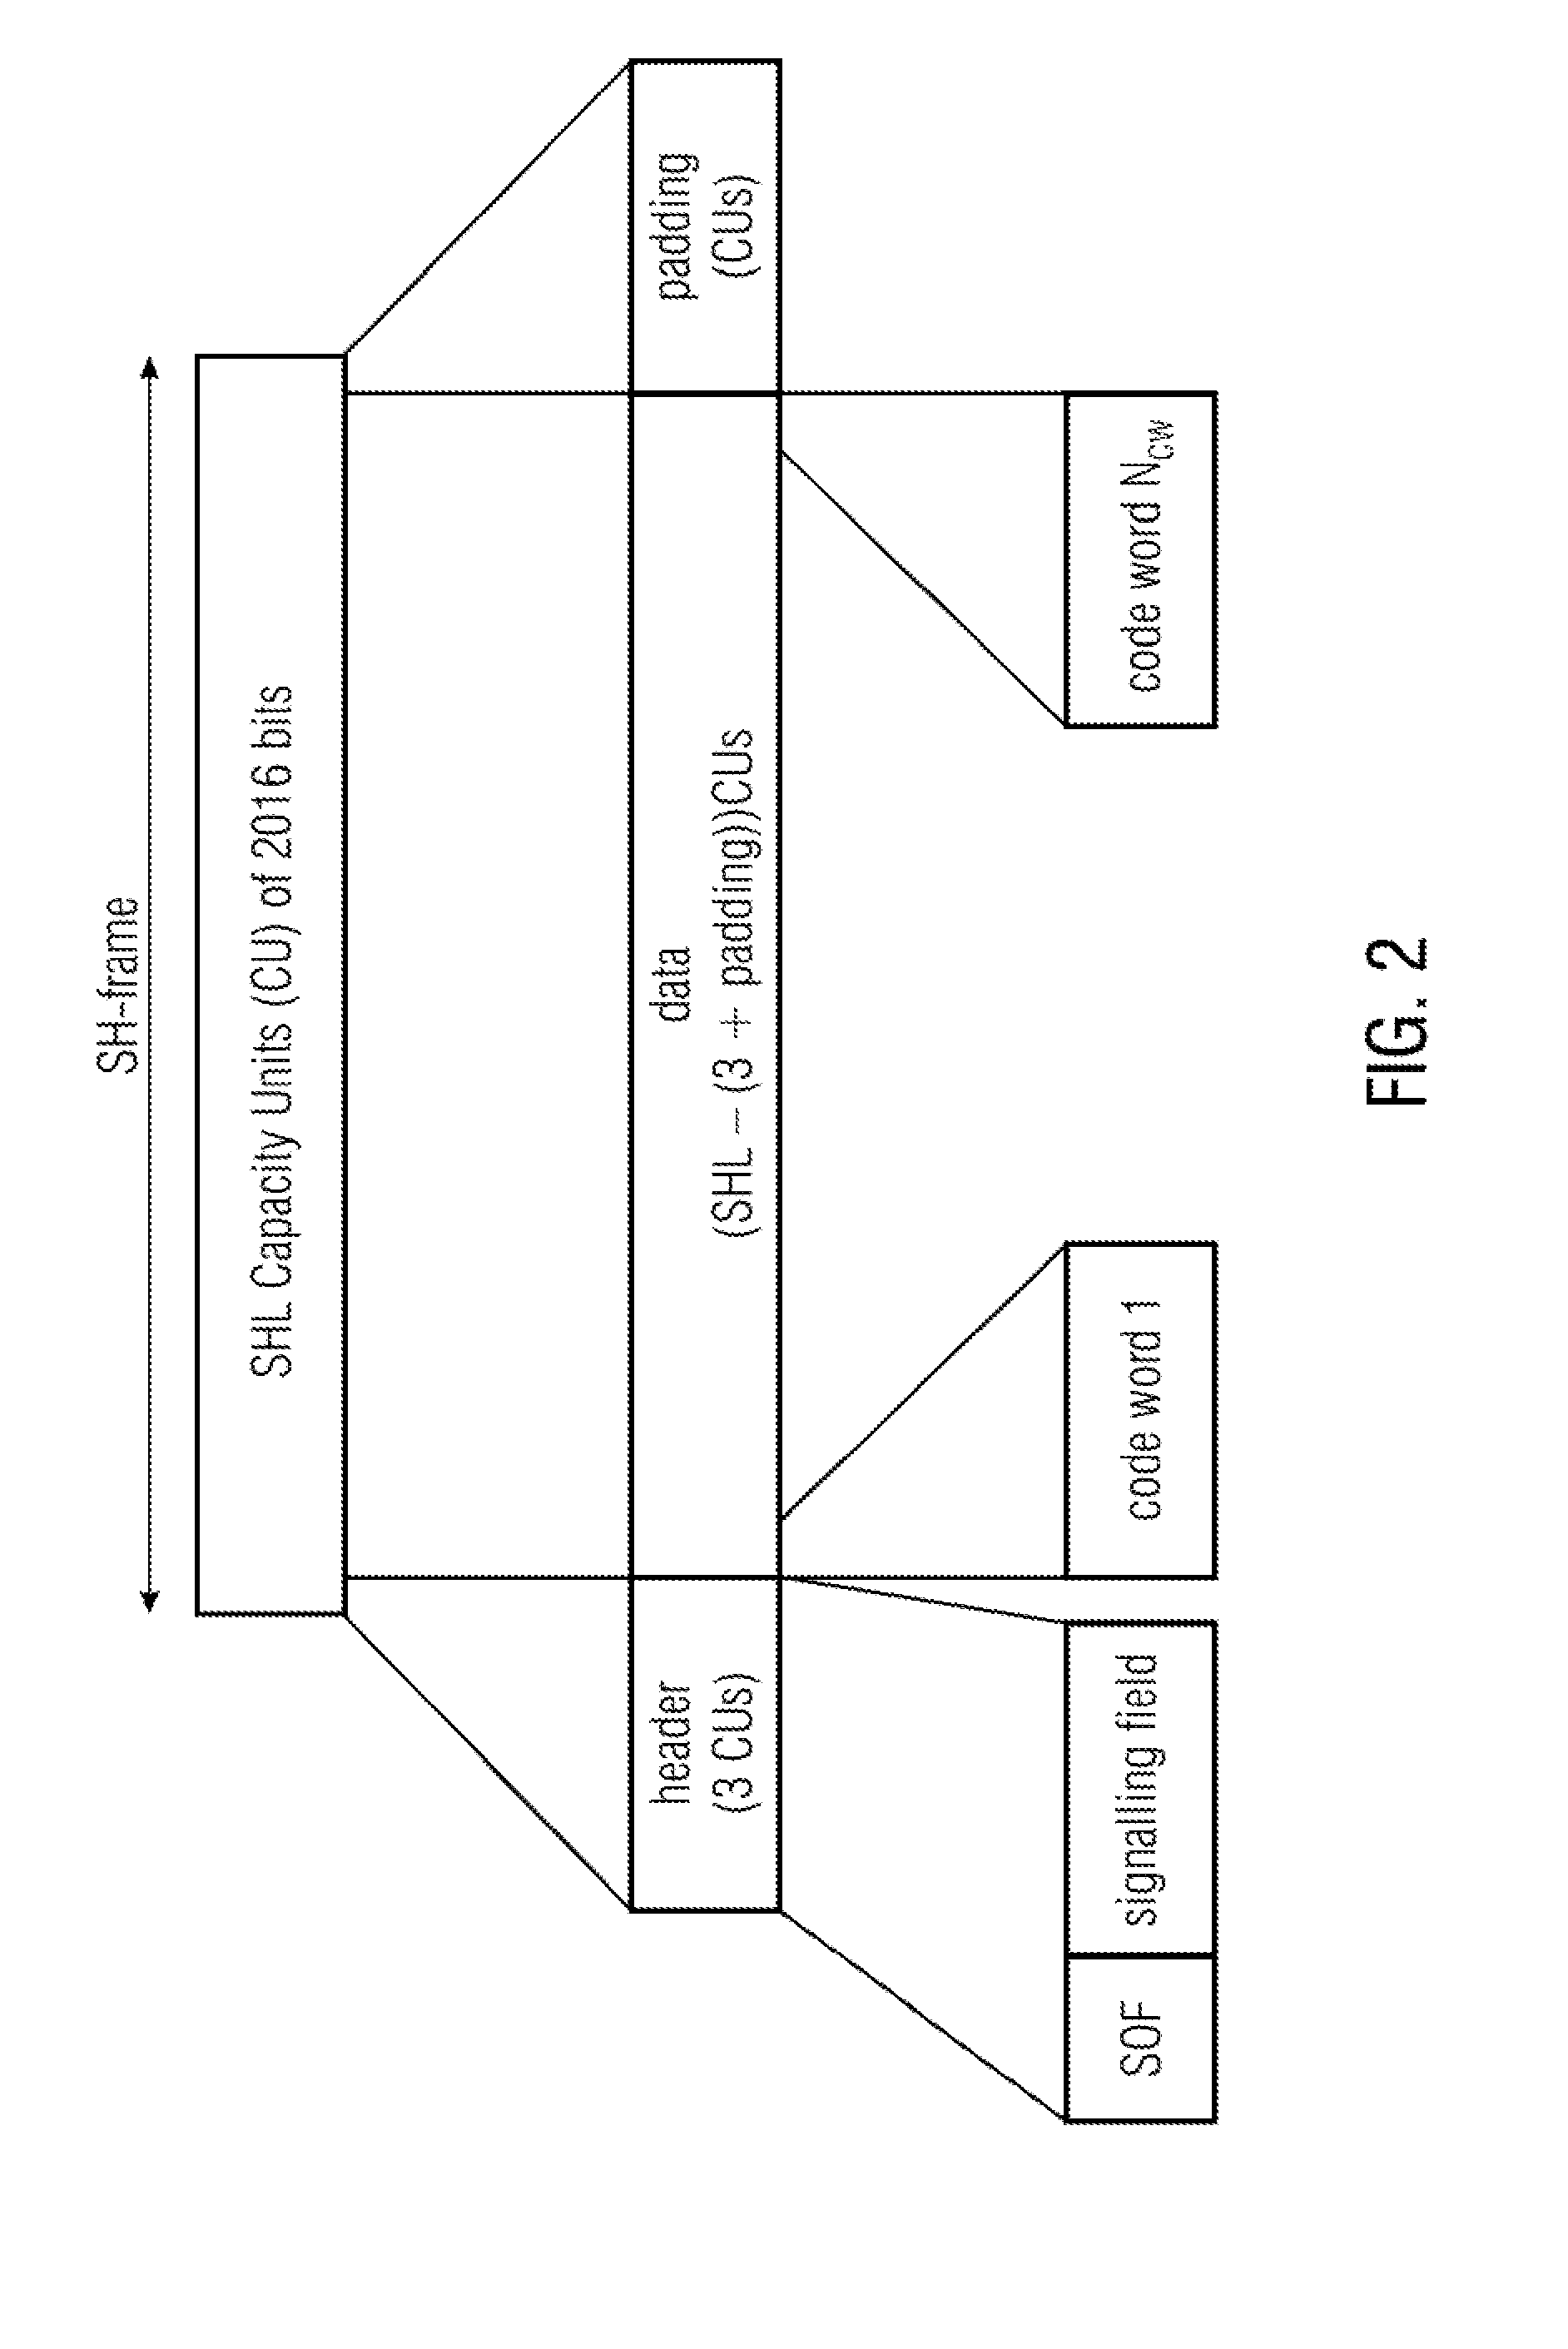 Two-stage signaling for transmission of a datastream